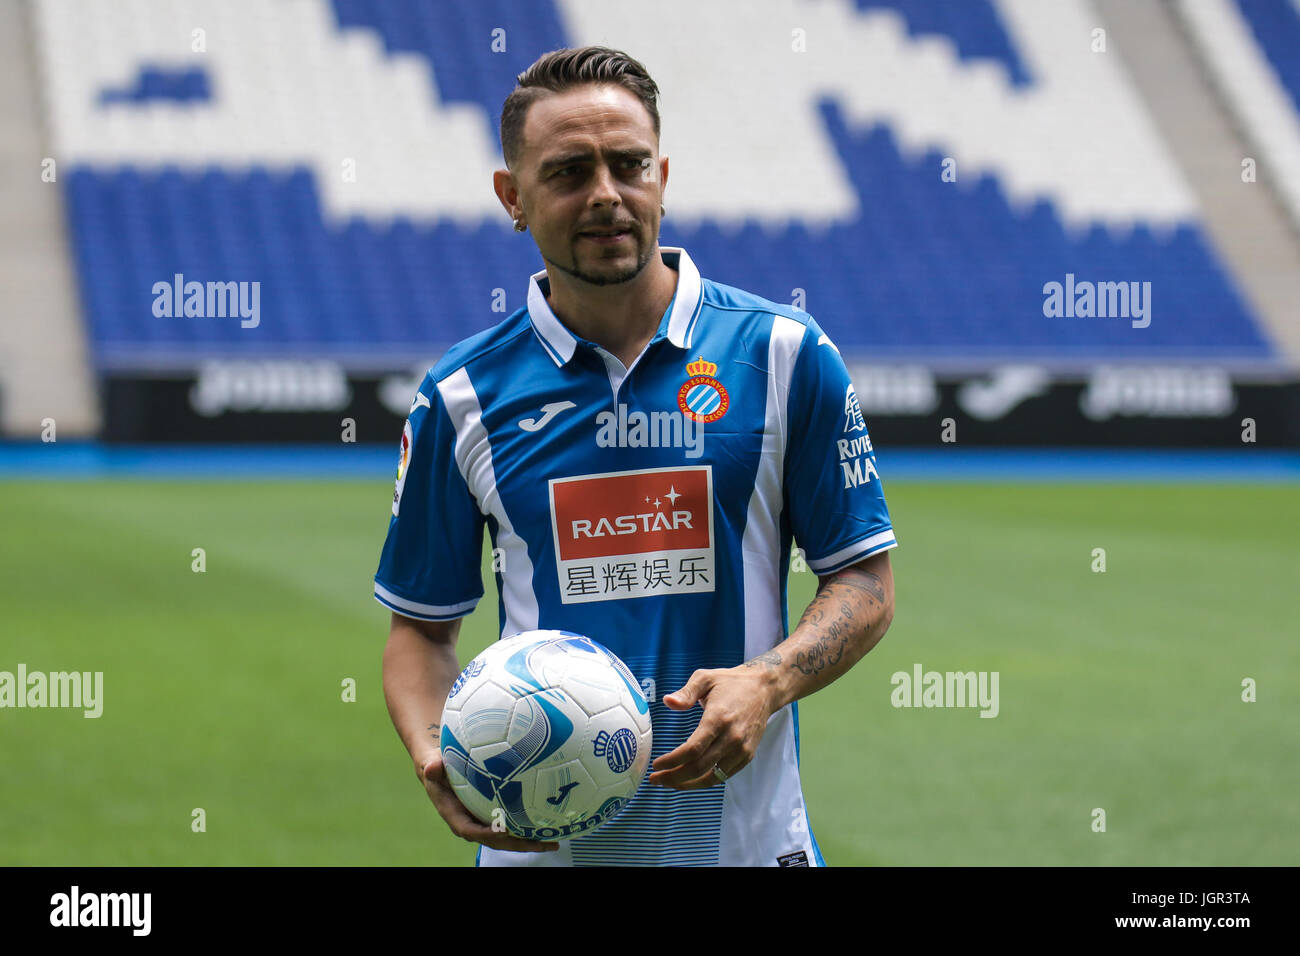 Soccerplayer Sergio Garcia during the presentation as players of Espanyol  in Barcelona Monday, July 10, 2017 Stock Photo - Alamy